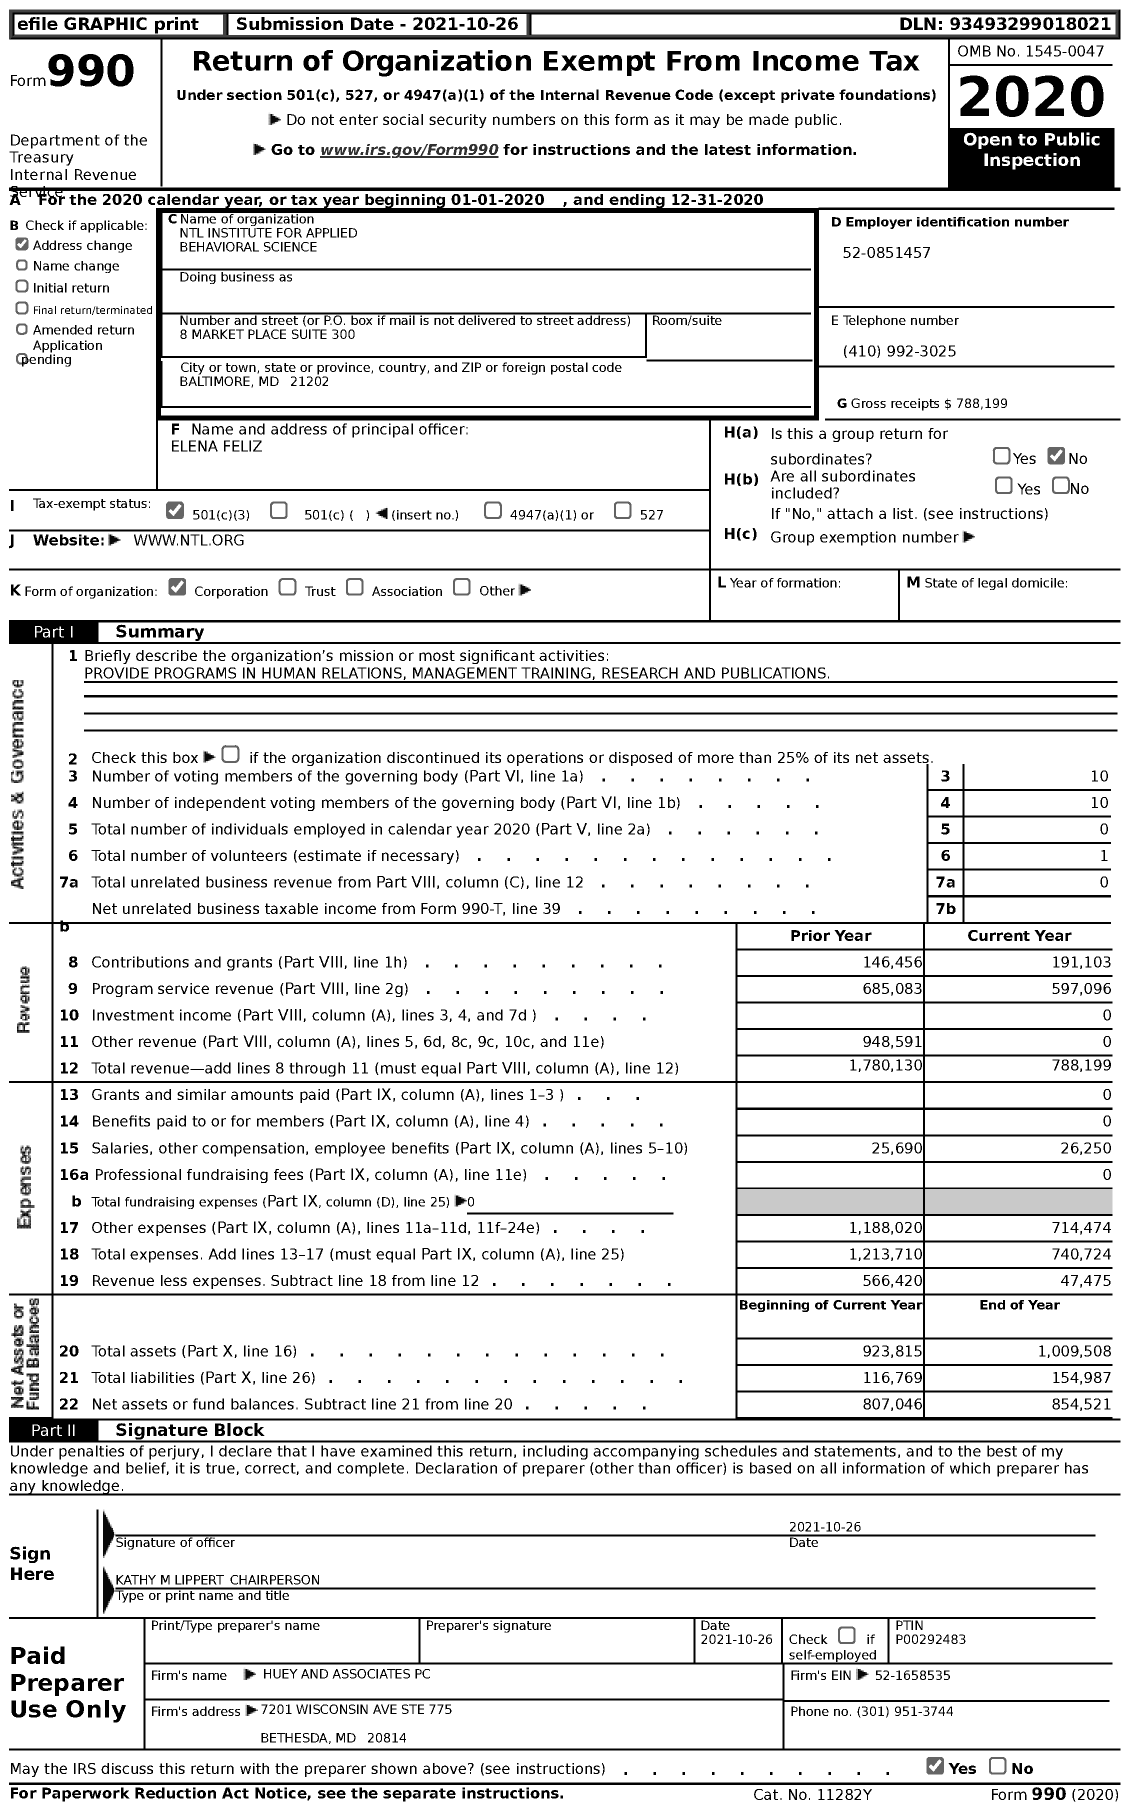 Image of first page of 2020 Form 990 for NTL Institute For Applied Behavioral Science